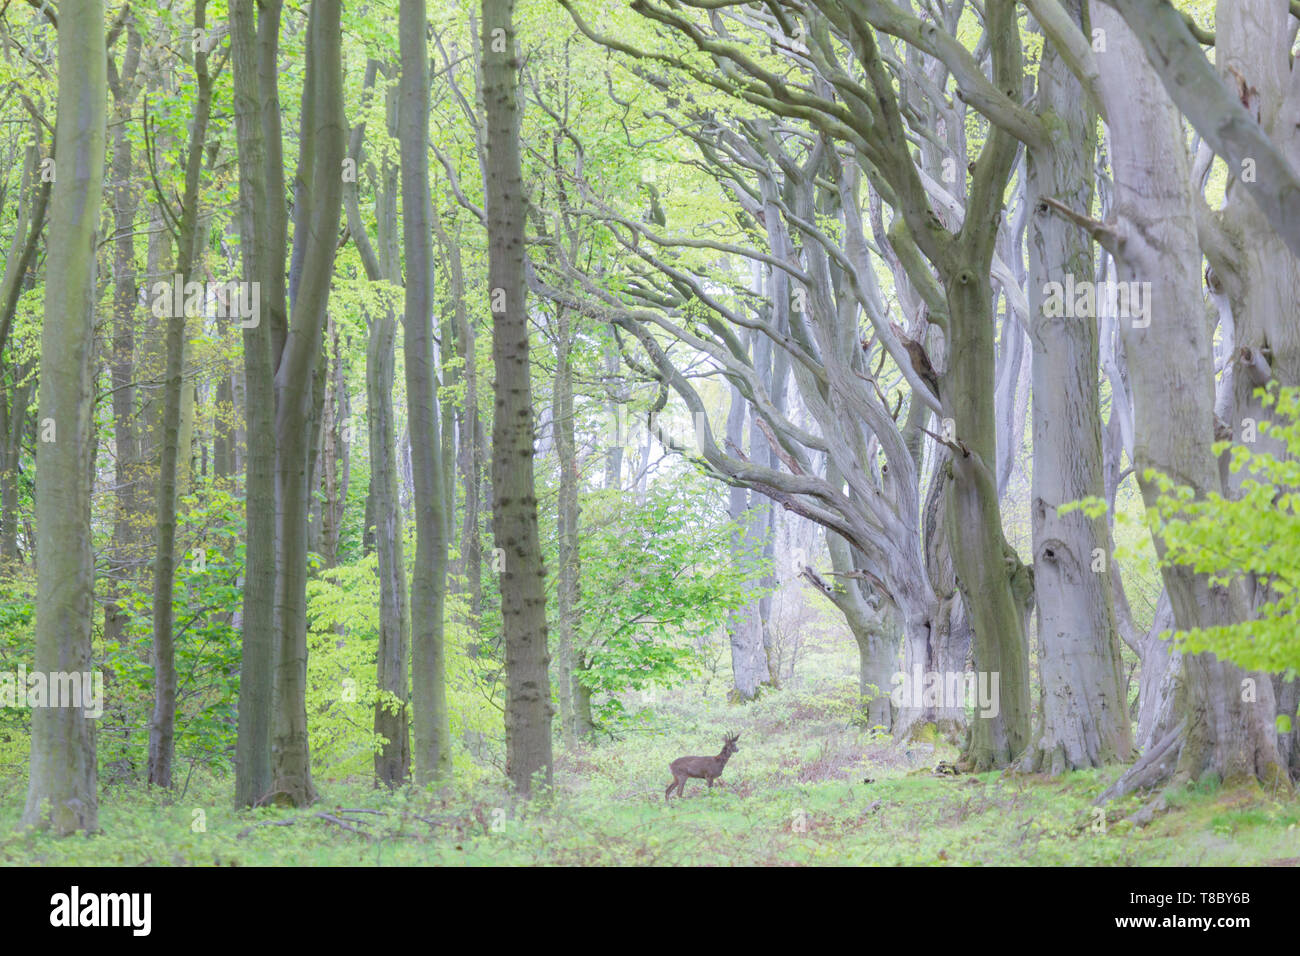 A wild roe deer in an ancient forest of beech trees at spring time in an English wood. Stock Photo